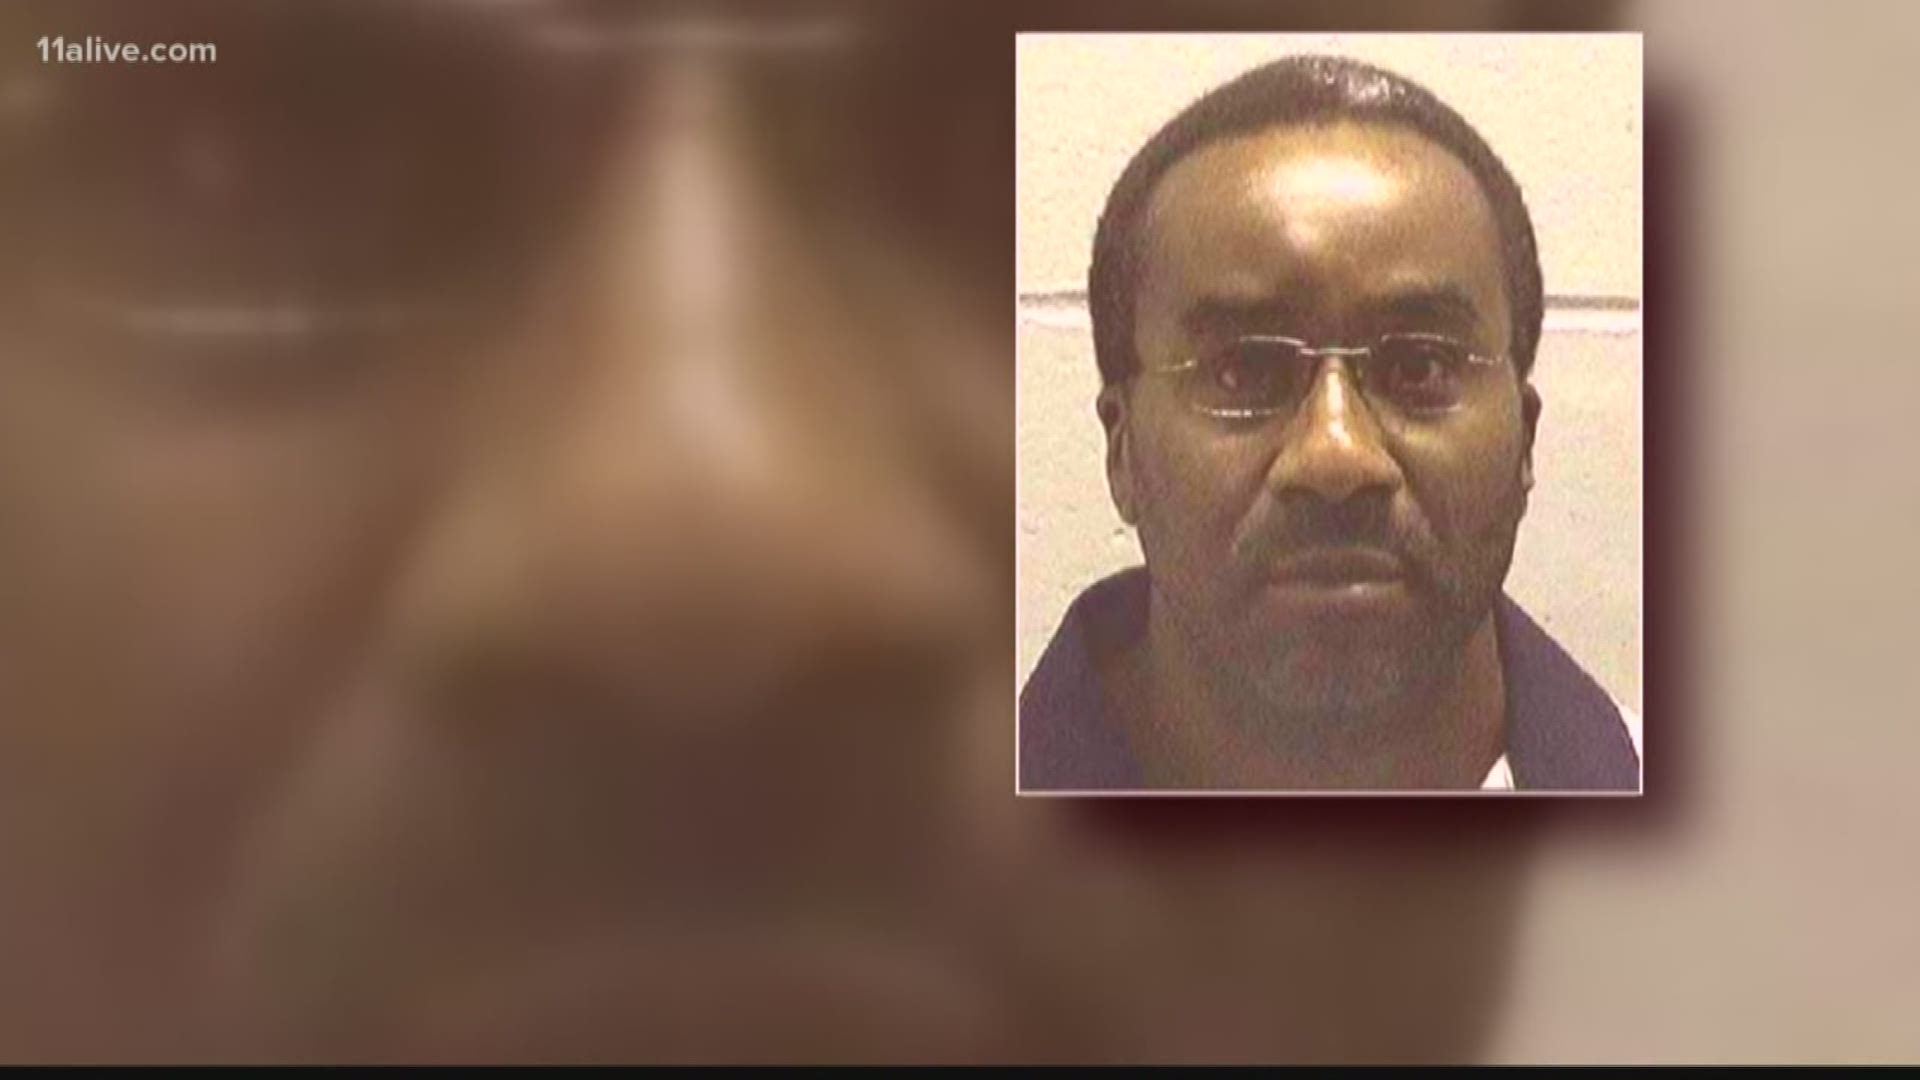 On Wednesday, Nov. 13, Georgia put Ray Jefferson Cromartie to death with a lethal injection. The 52-year-old was pronounced dead at 10:59 p.m.